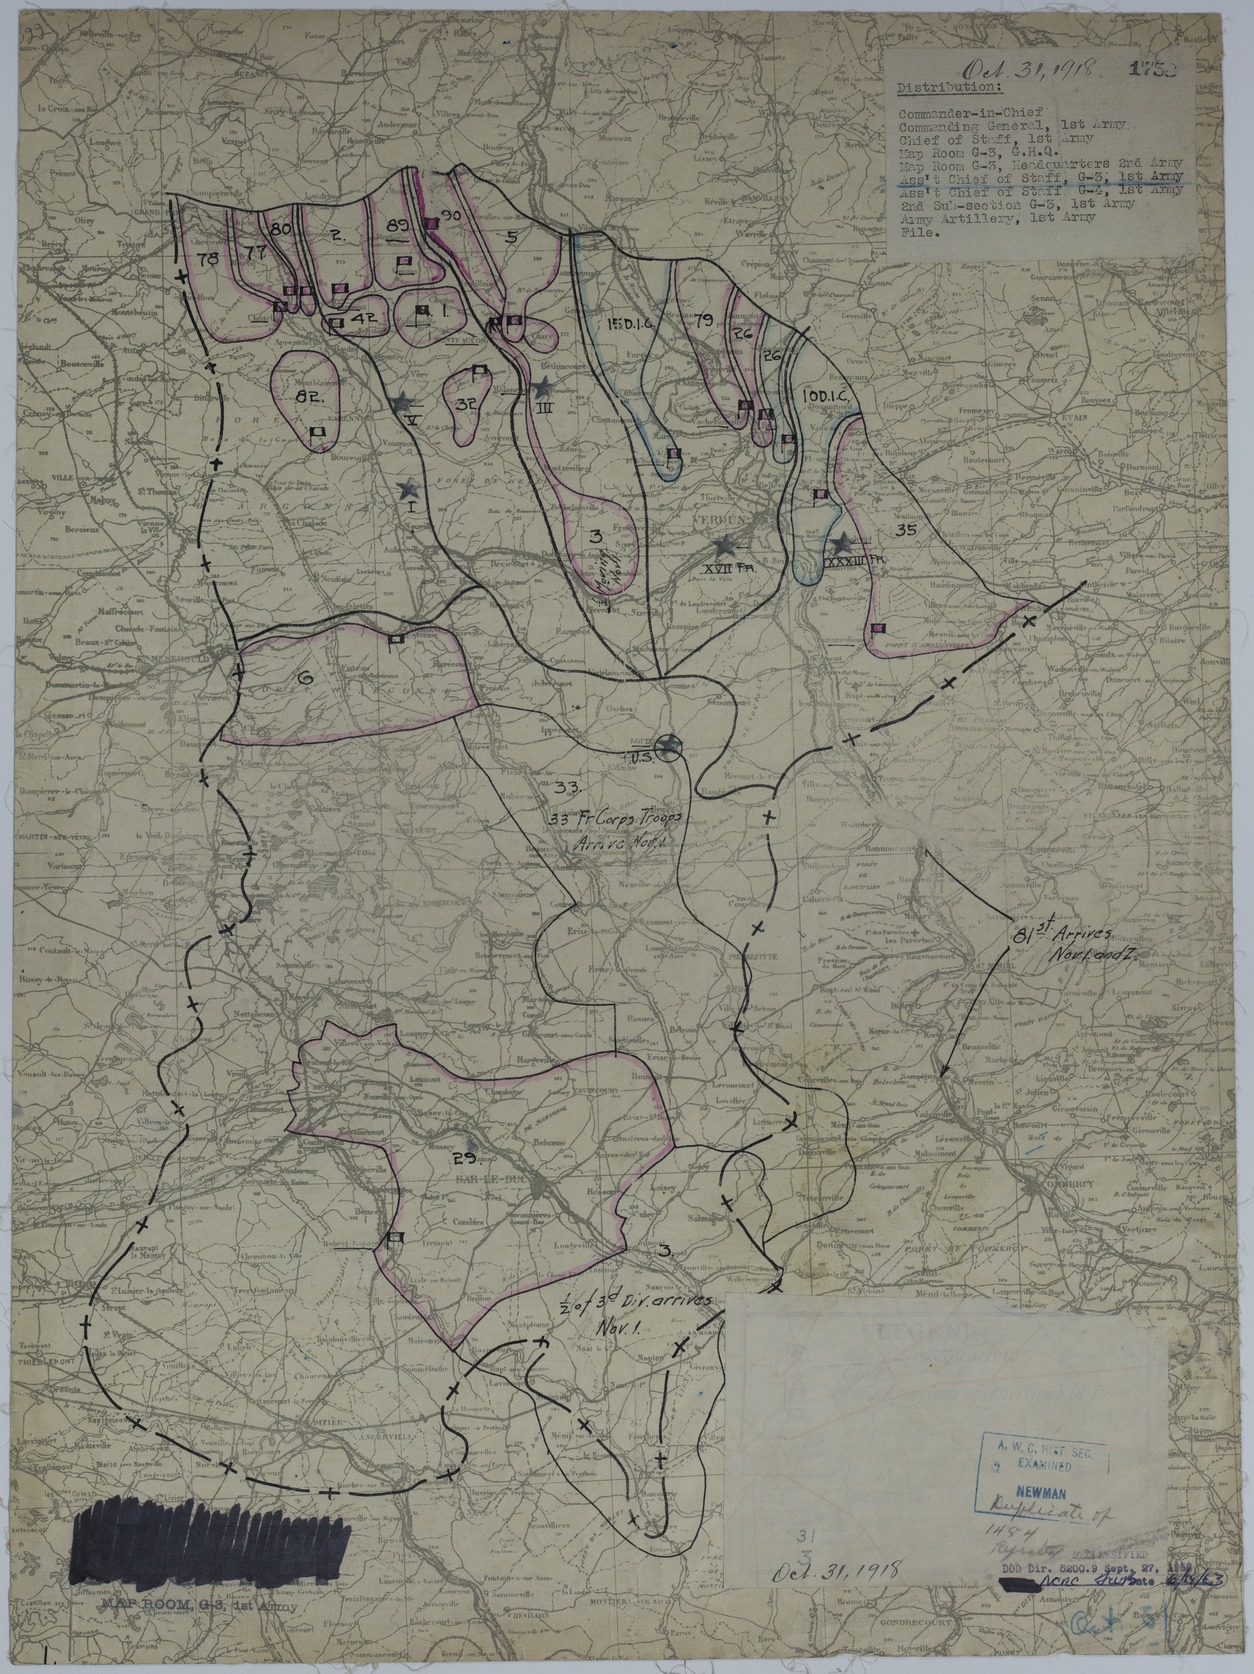 Map of Divisional Positions on October 31, 1918 | Harry S. Truman